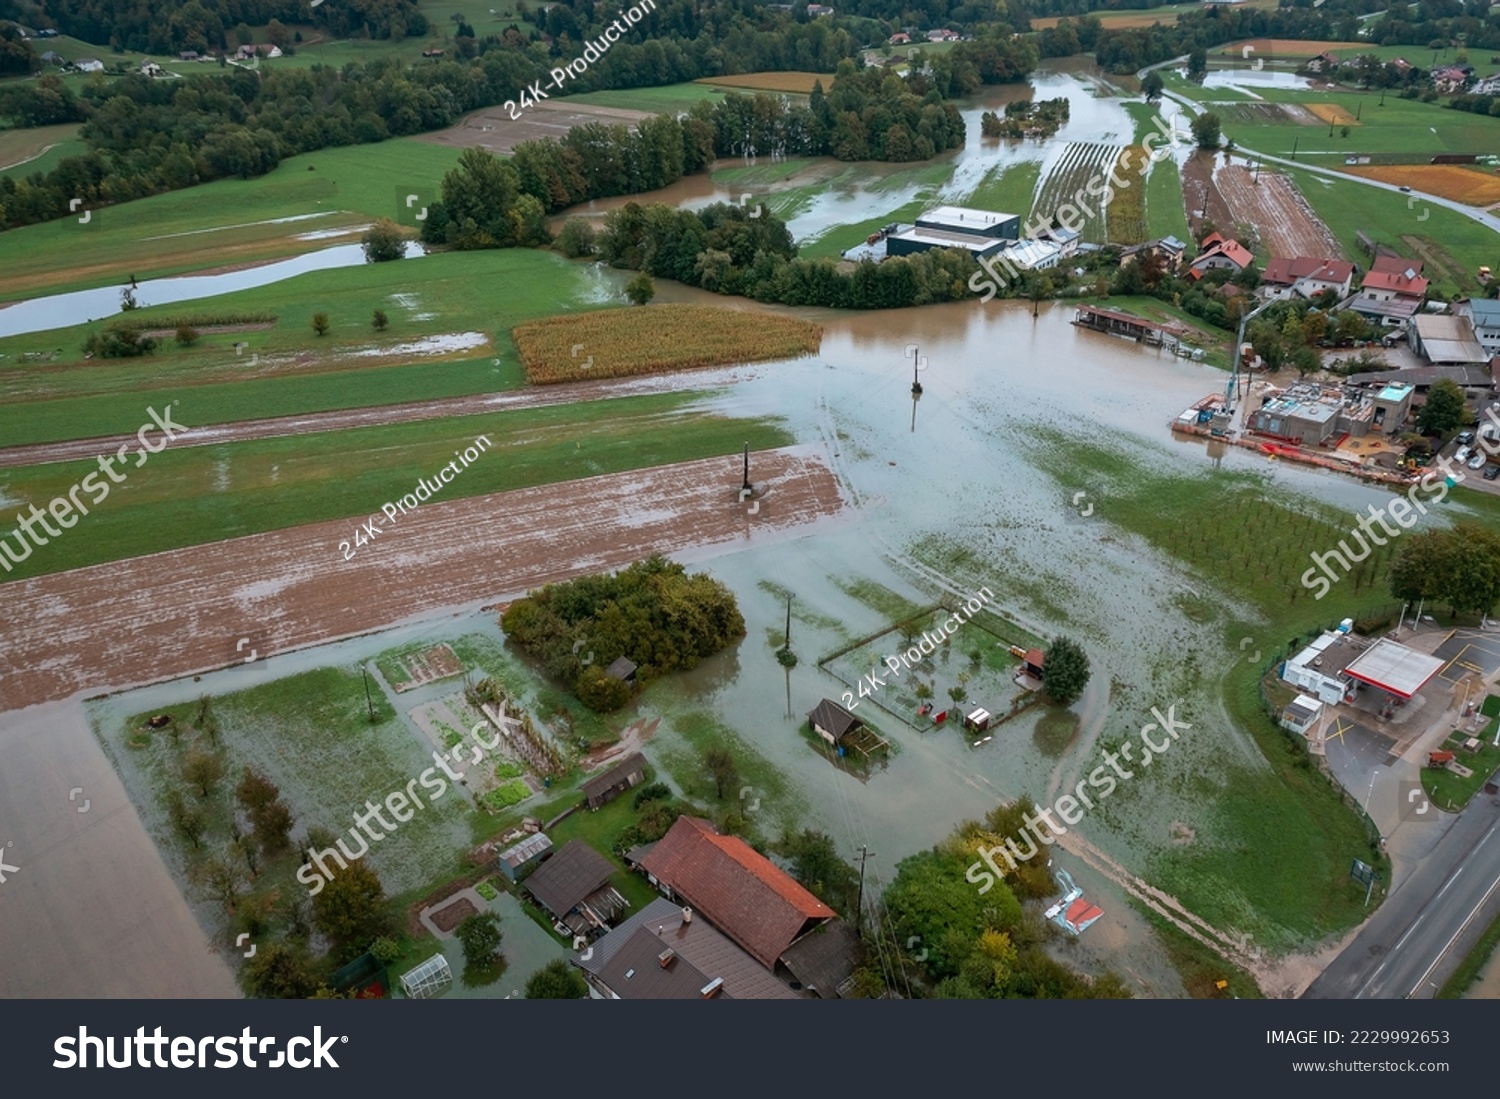 Extensive deluge across Europe, flooded mountain valley, near the households area and traffic ways, drone shot. Extreme climate event. #2229992653